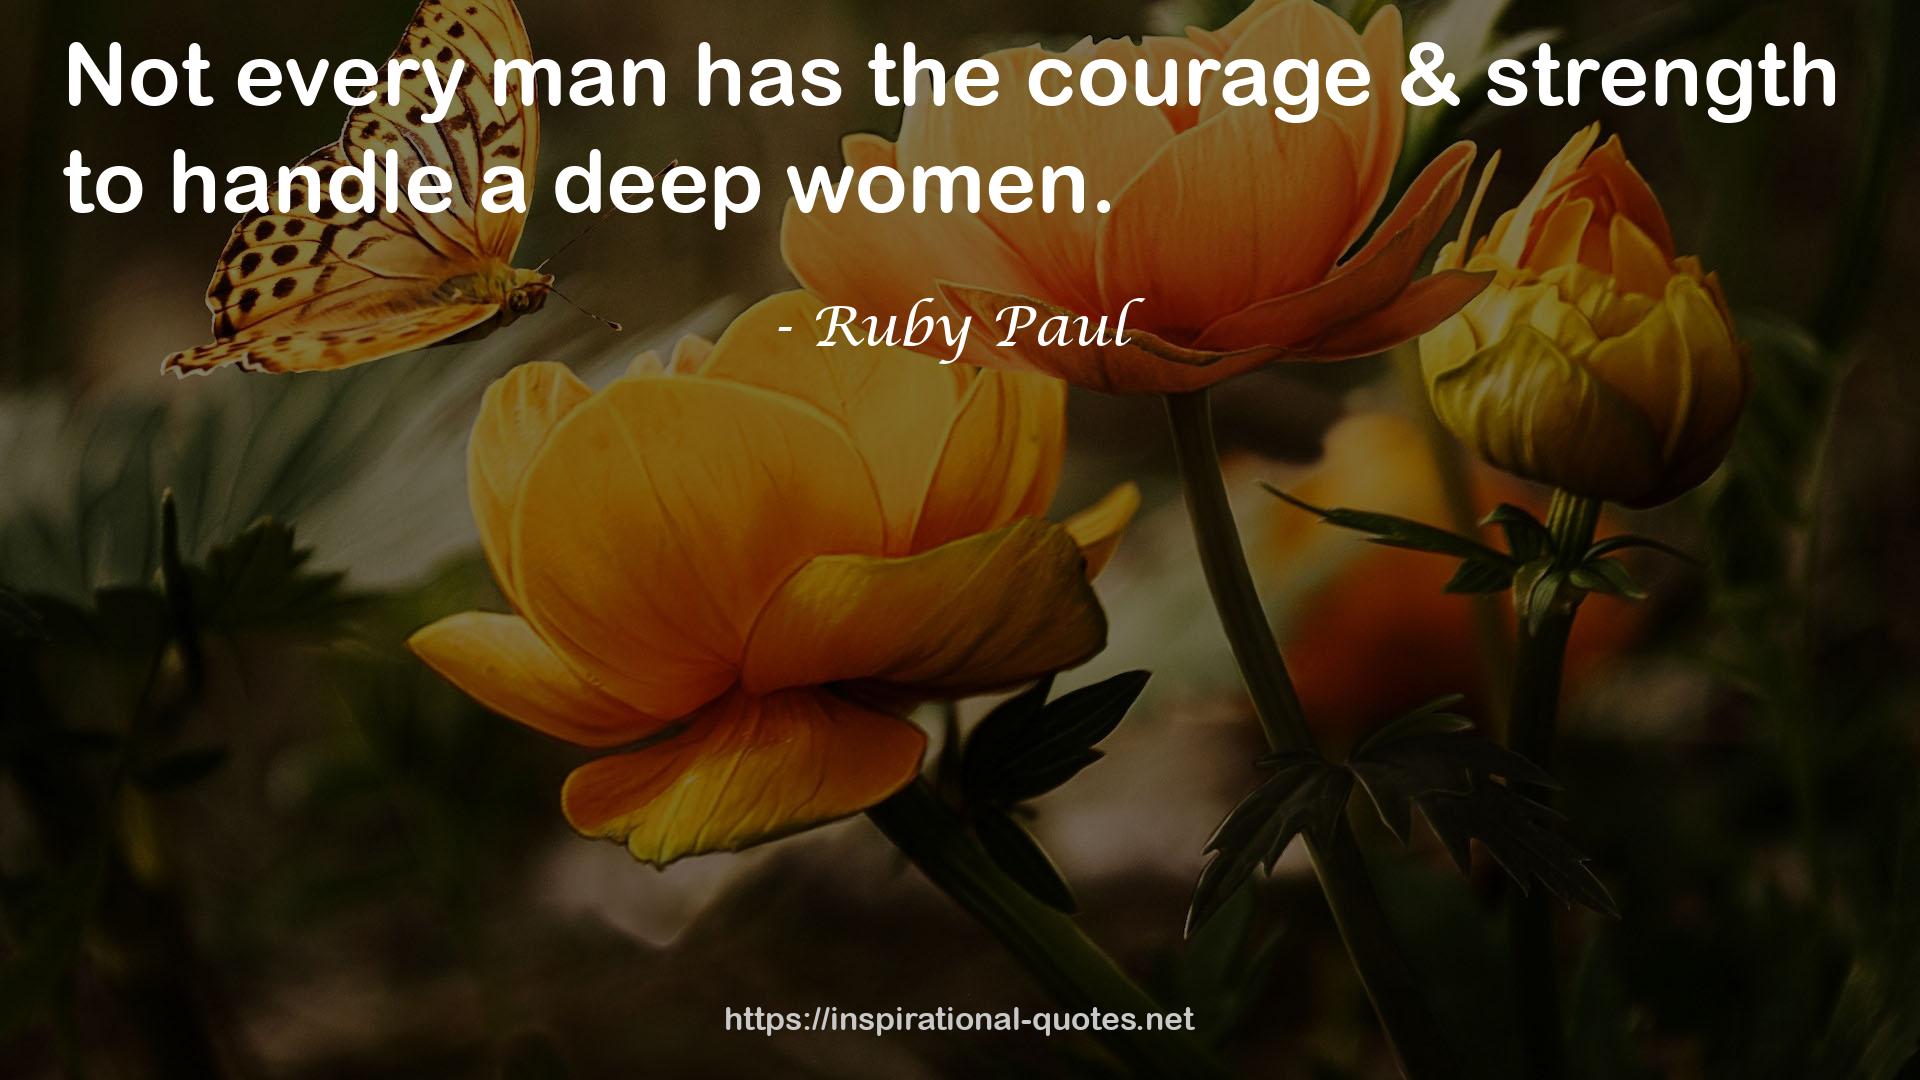 Ruby Paul QUOTES